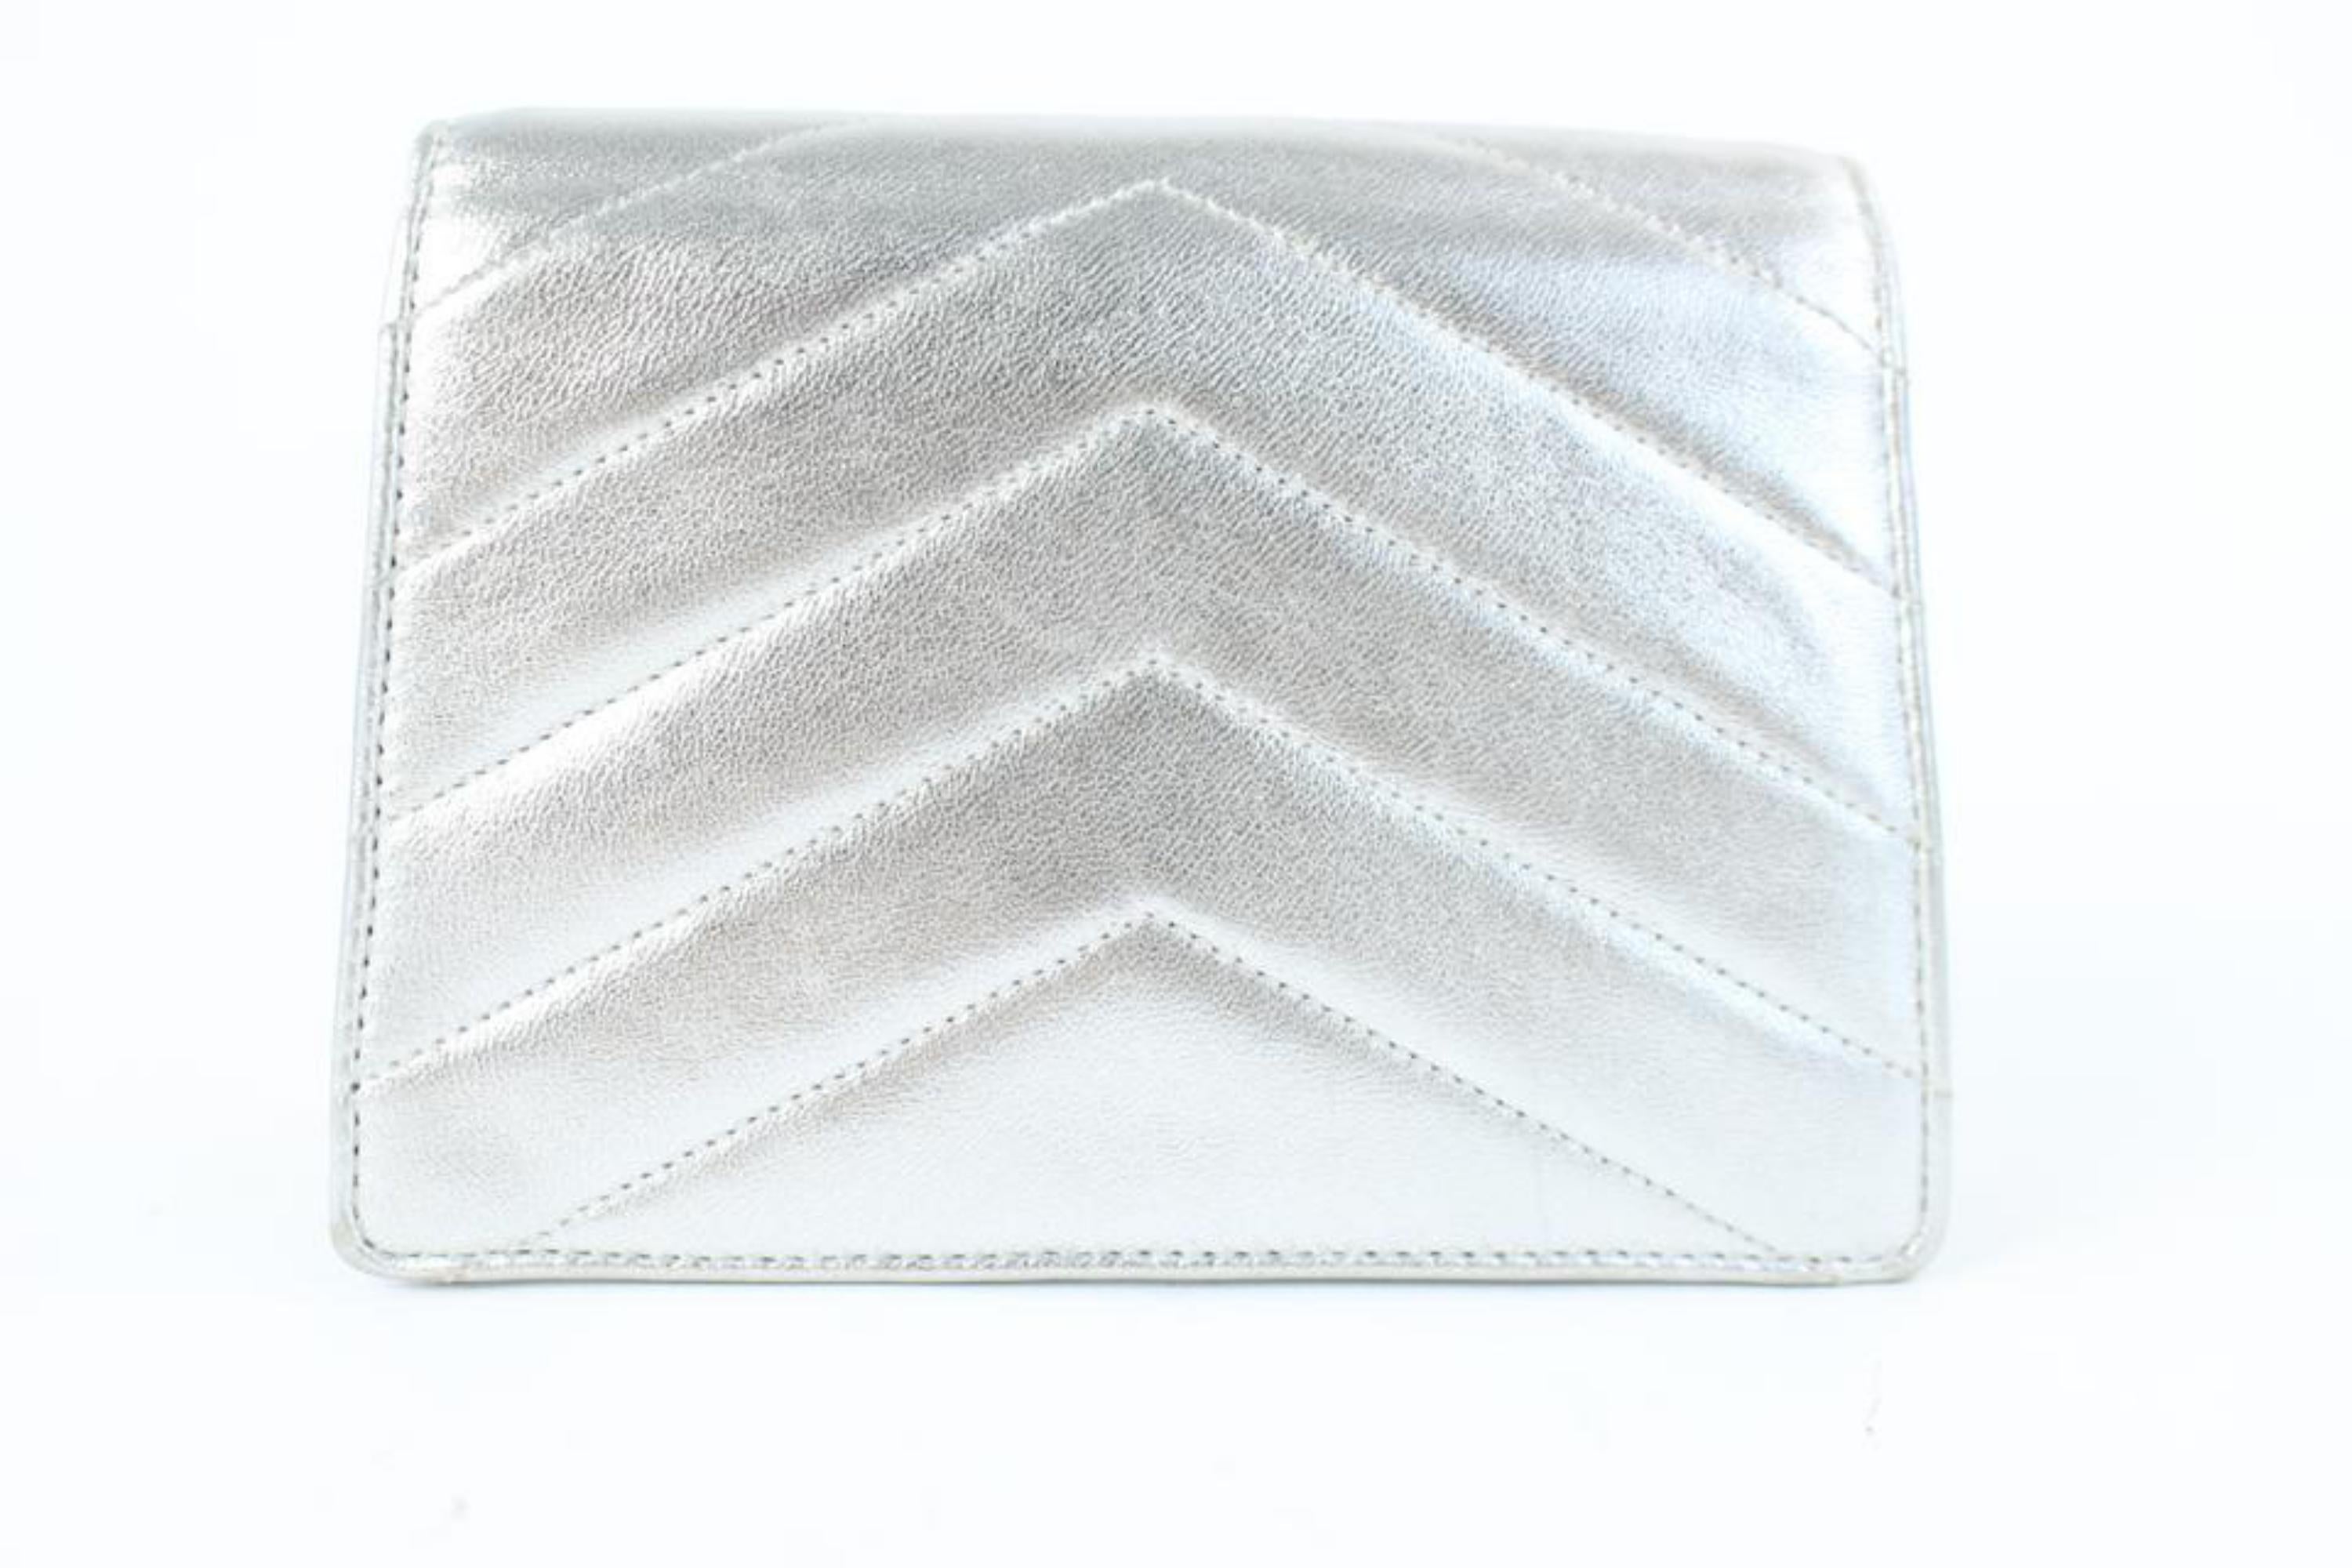 Chanel Quilted Chevron Mini Flap 03cz0717 Silver Metallic Leather Cross Body Bag For Sale 4